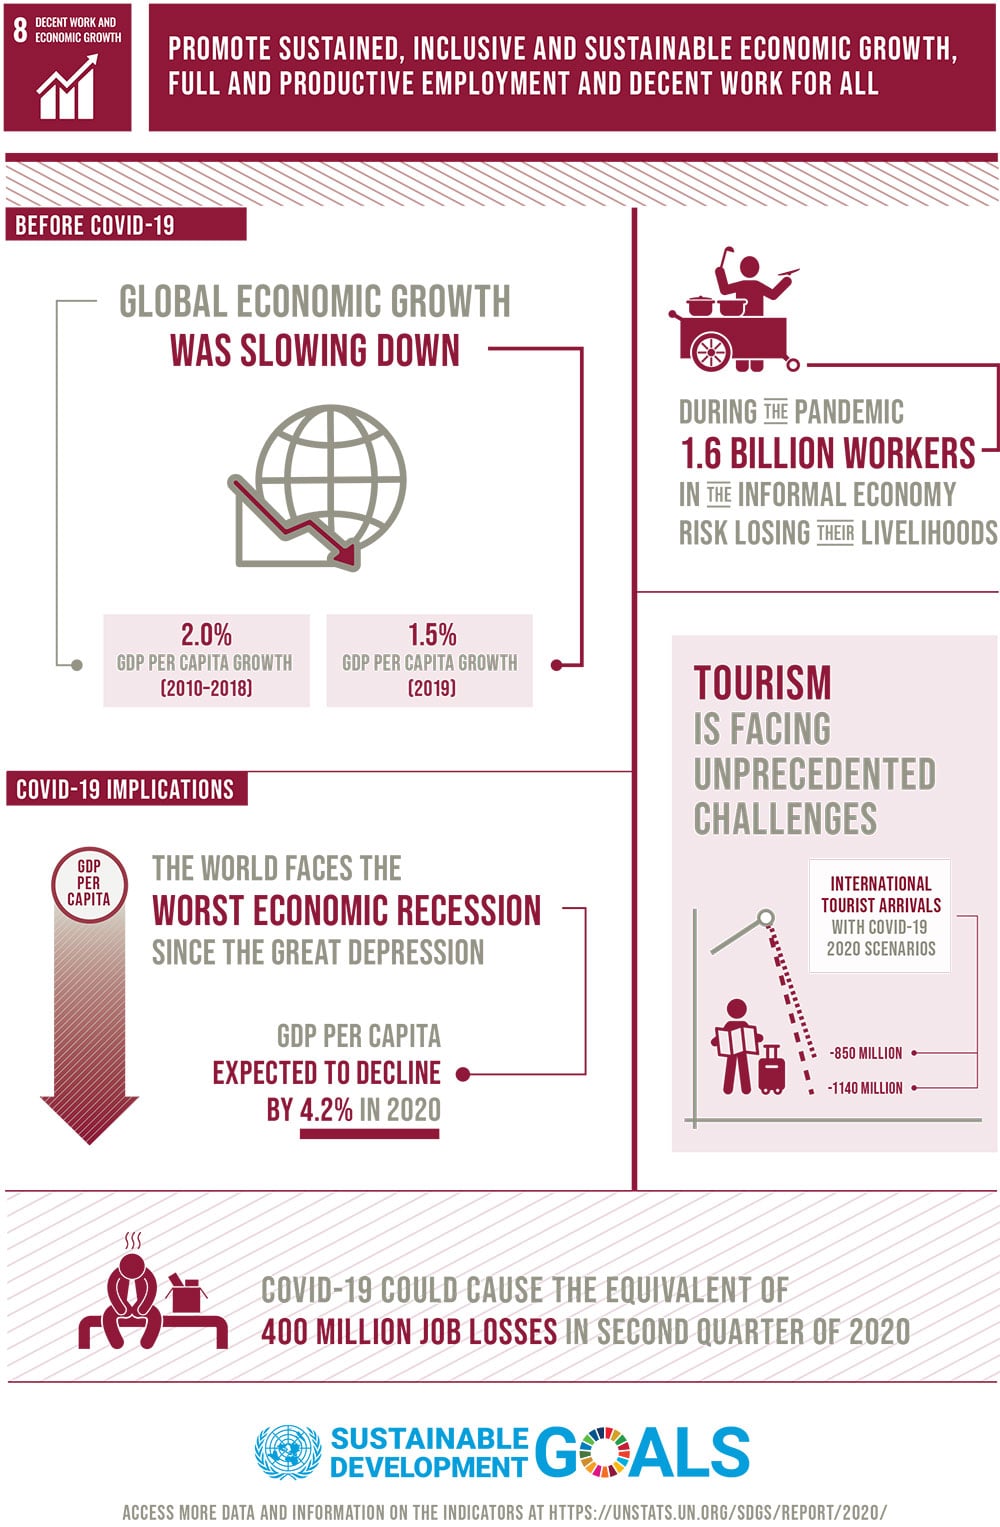 8 Decent Work and Economic growth